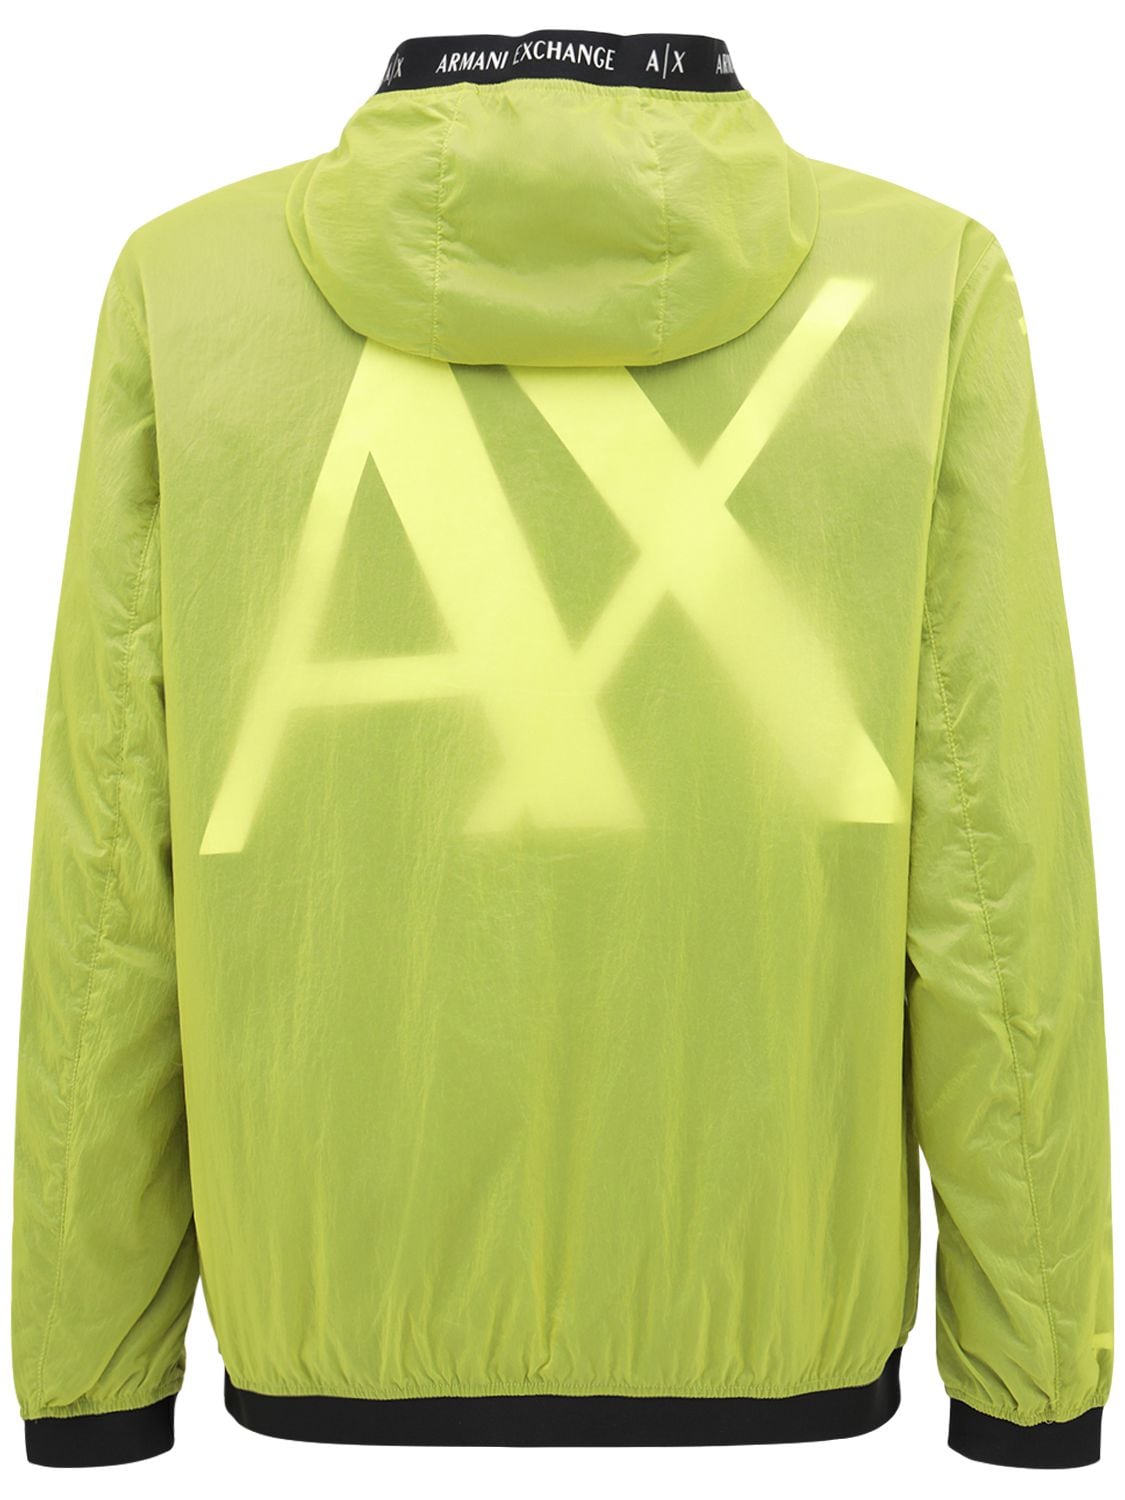 Armani Exchange 尼龙连帽夹克 In Yellow Lime